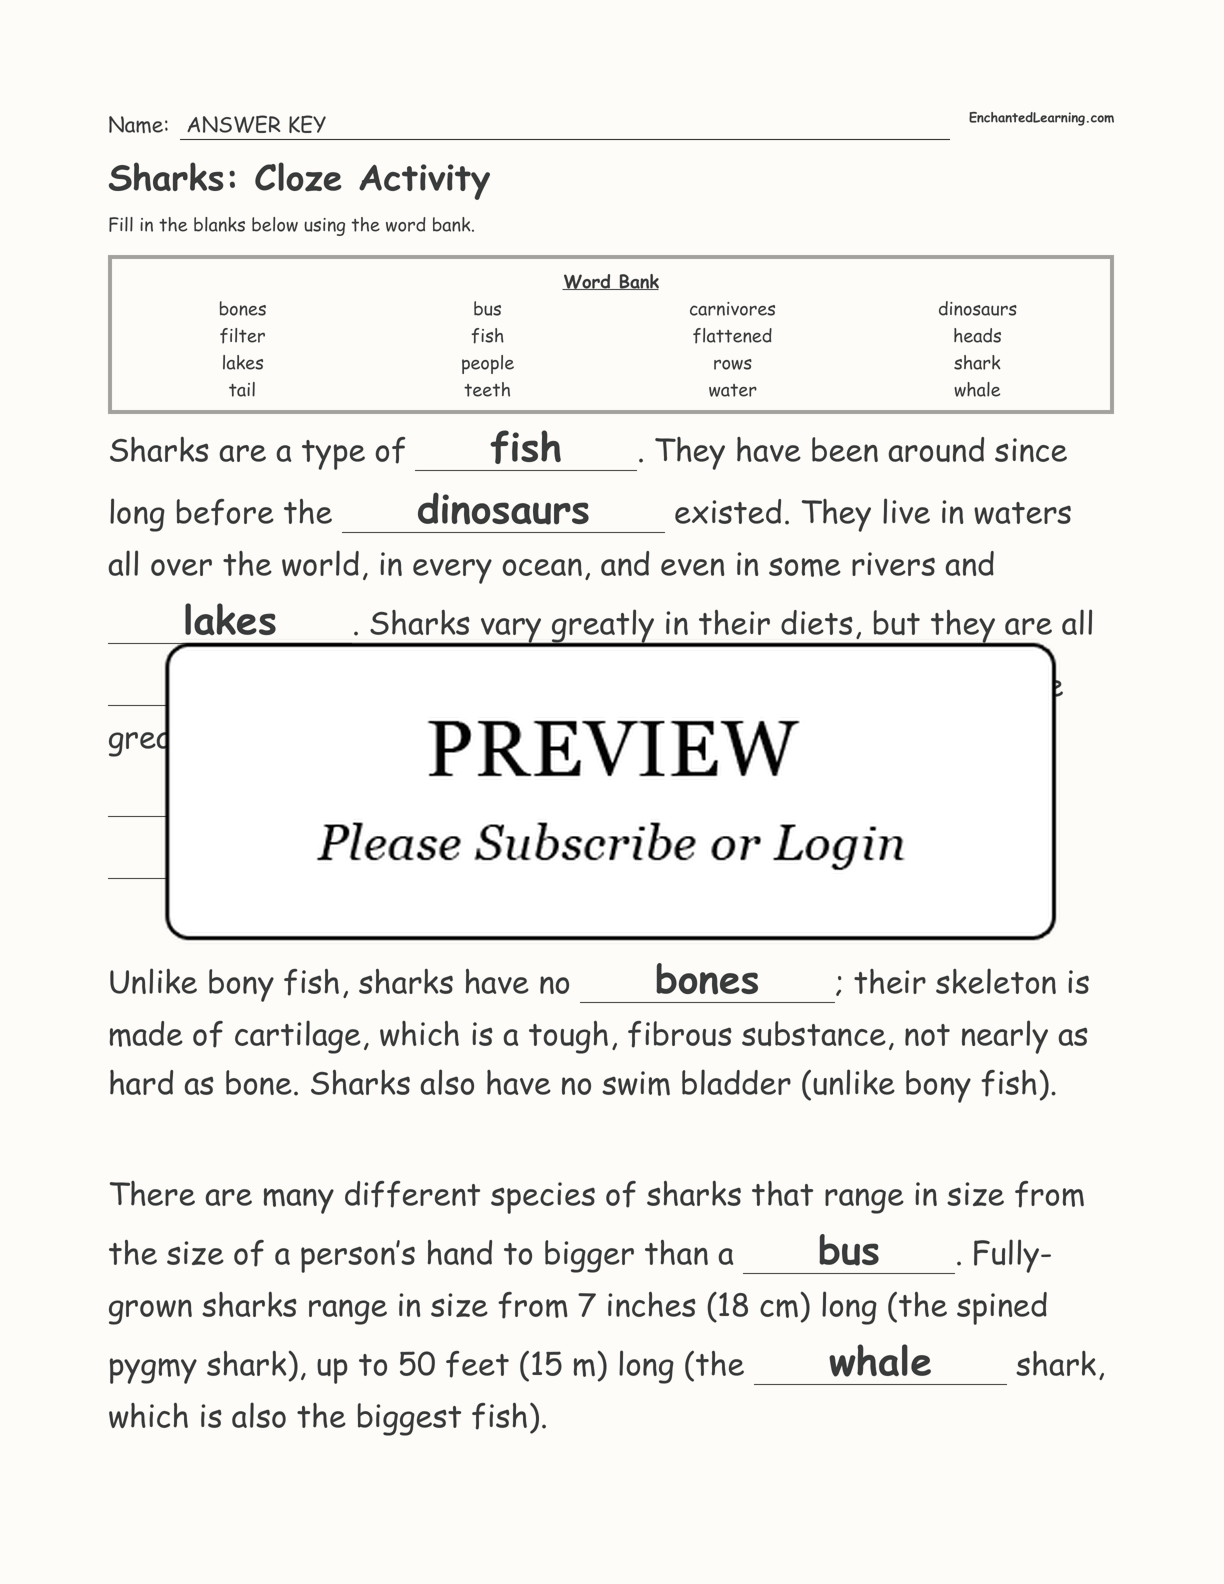 Sharks: Cloze Activity interactive worksheet page 3